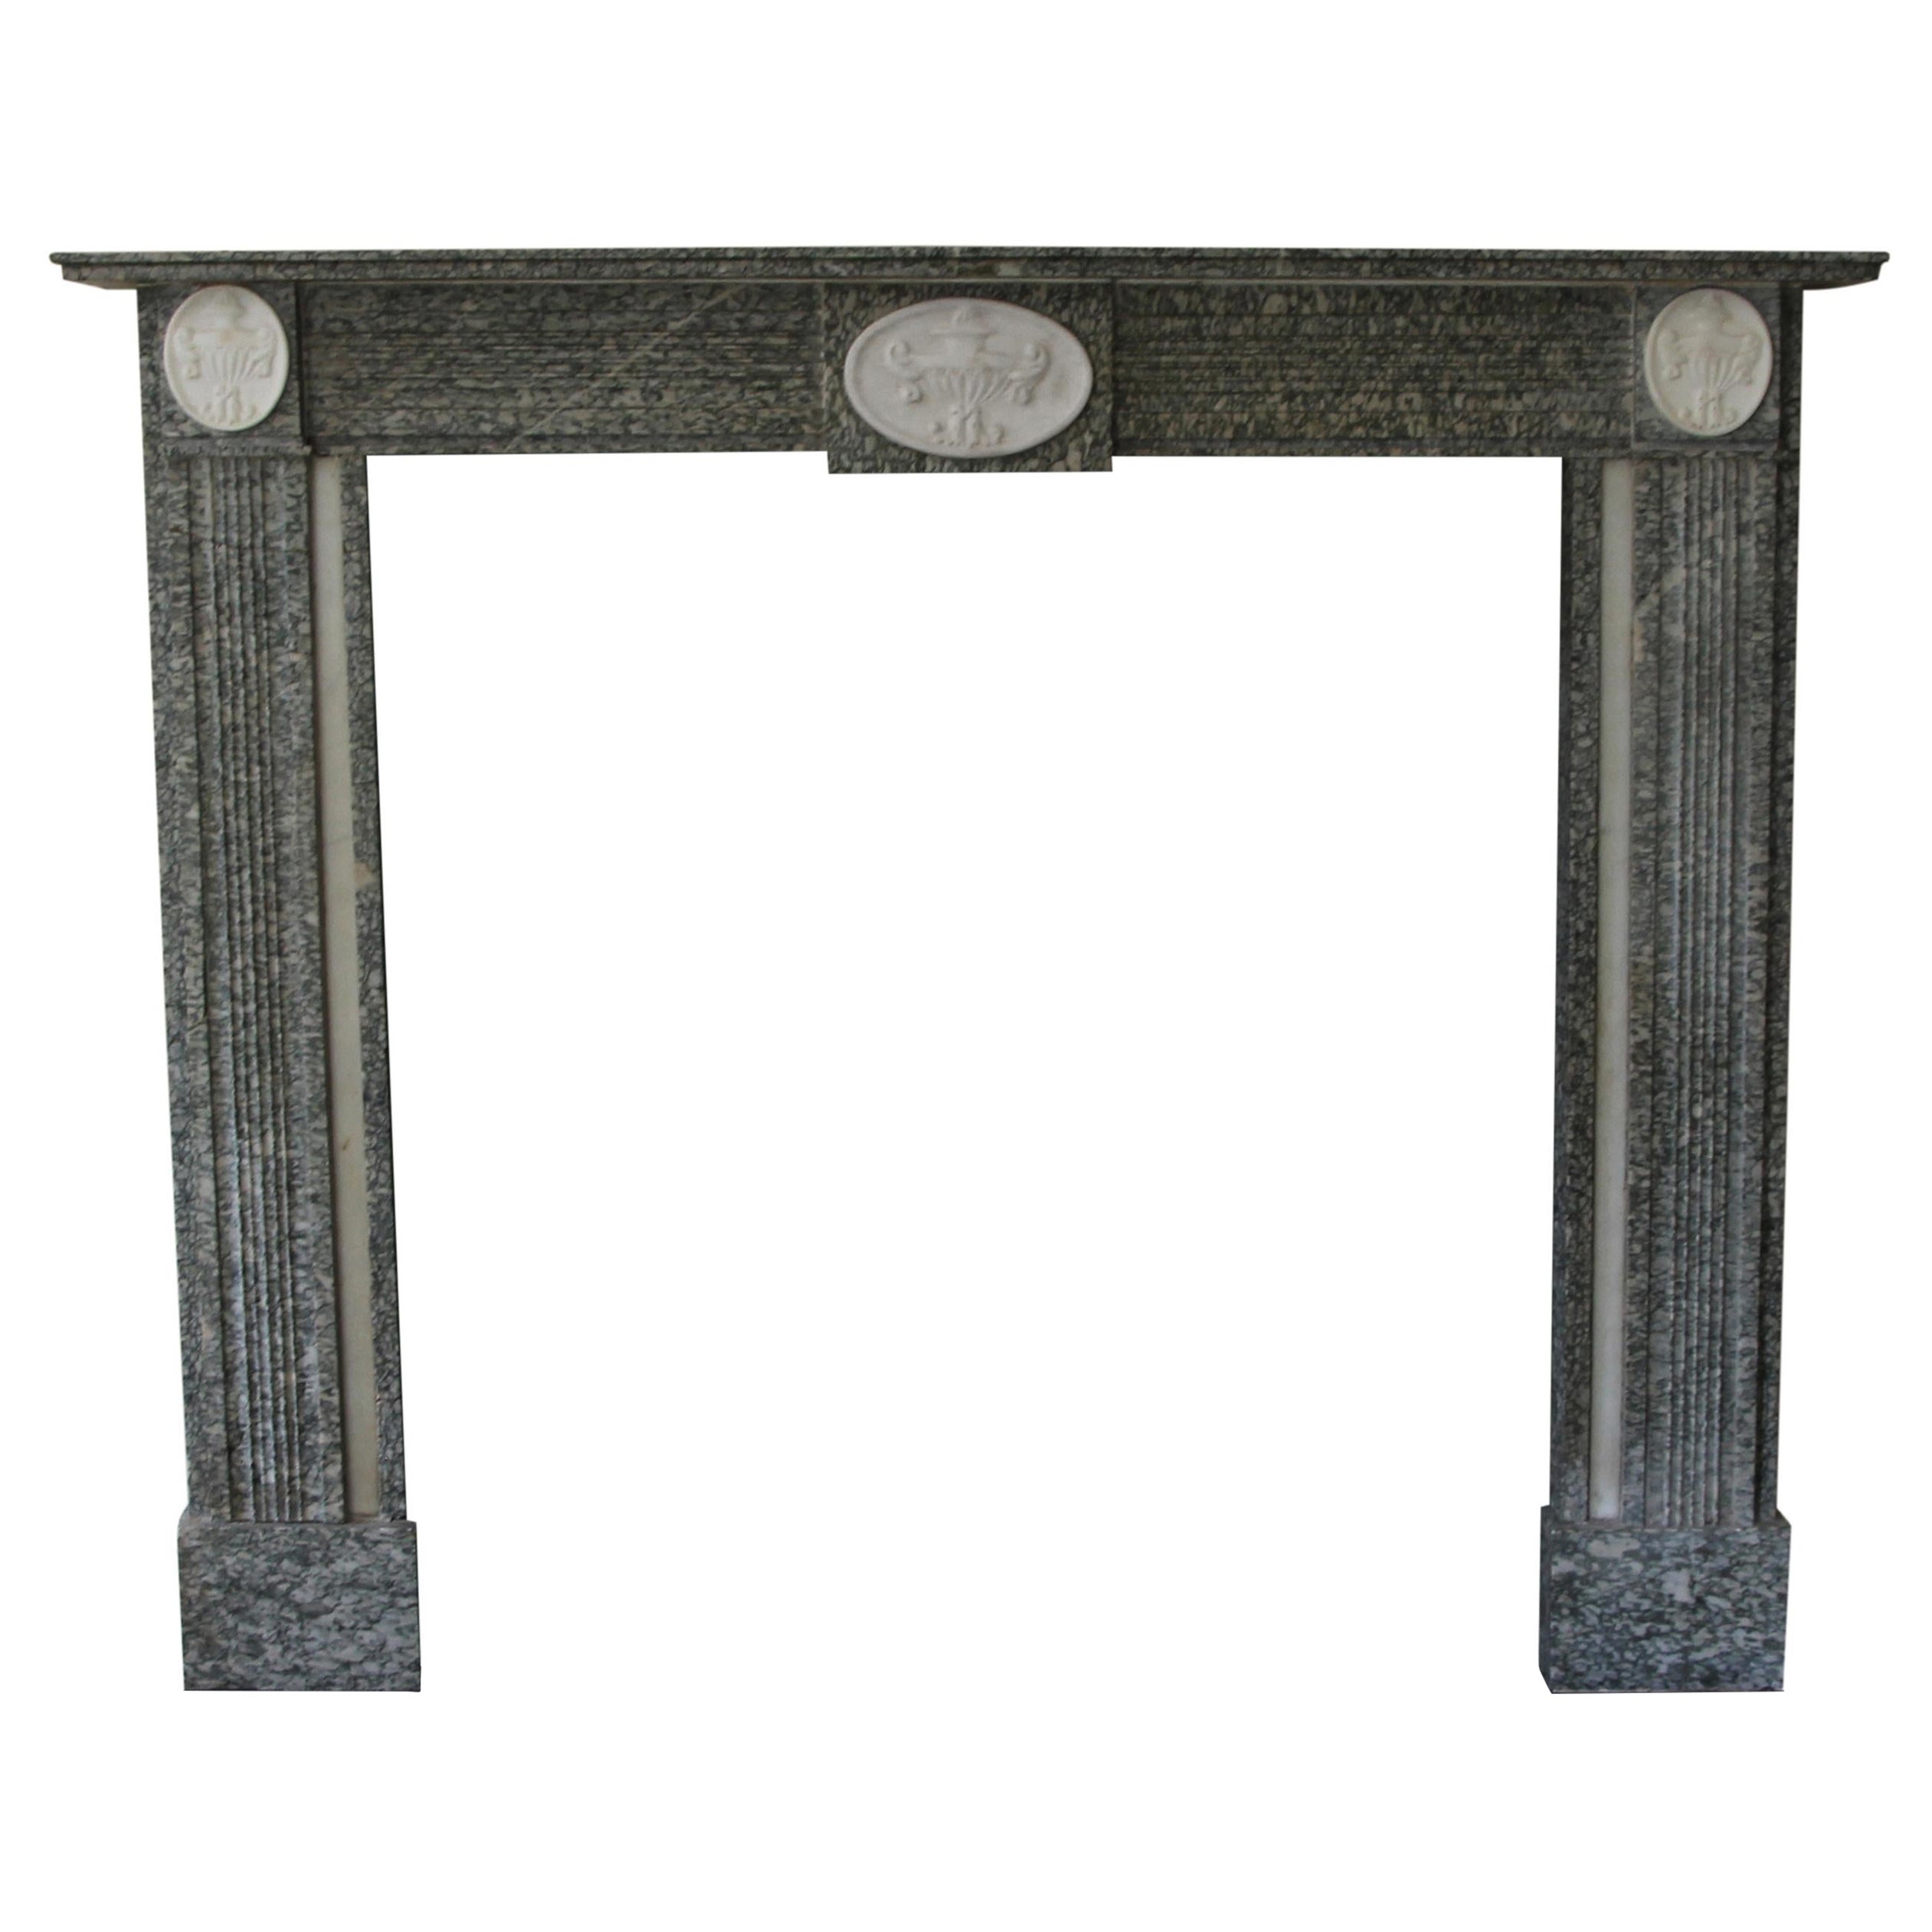 Waldorf Astoria Hotel Gray Marble Mantel with Urn Detail For Sale